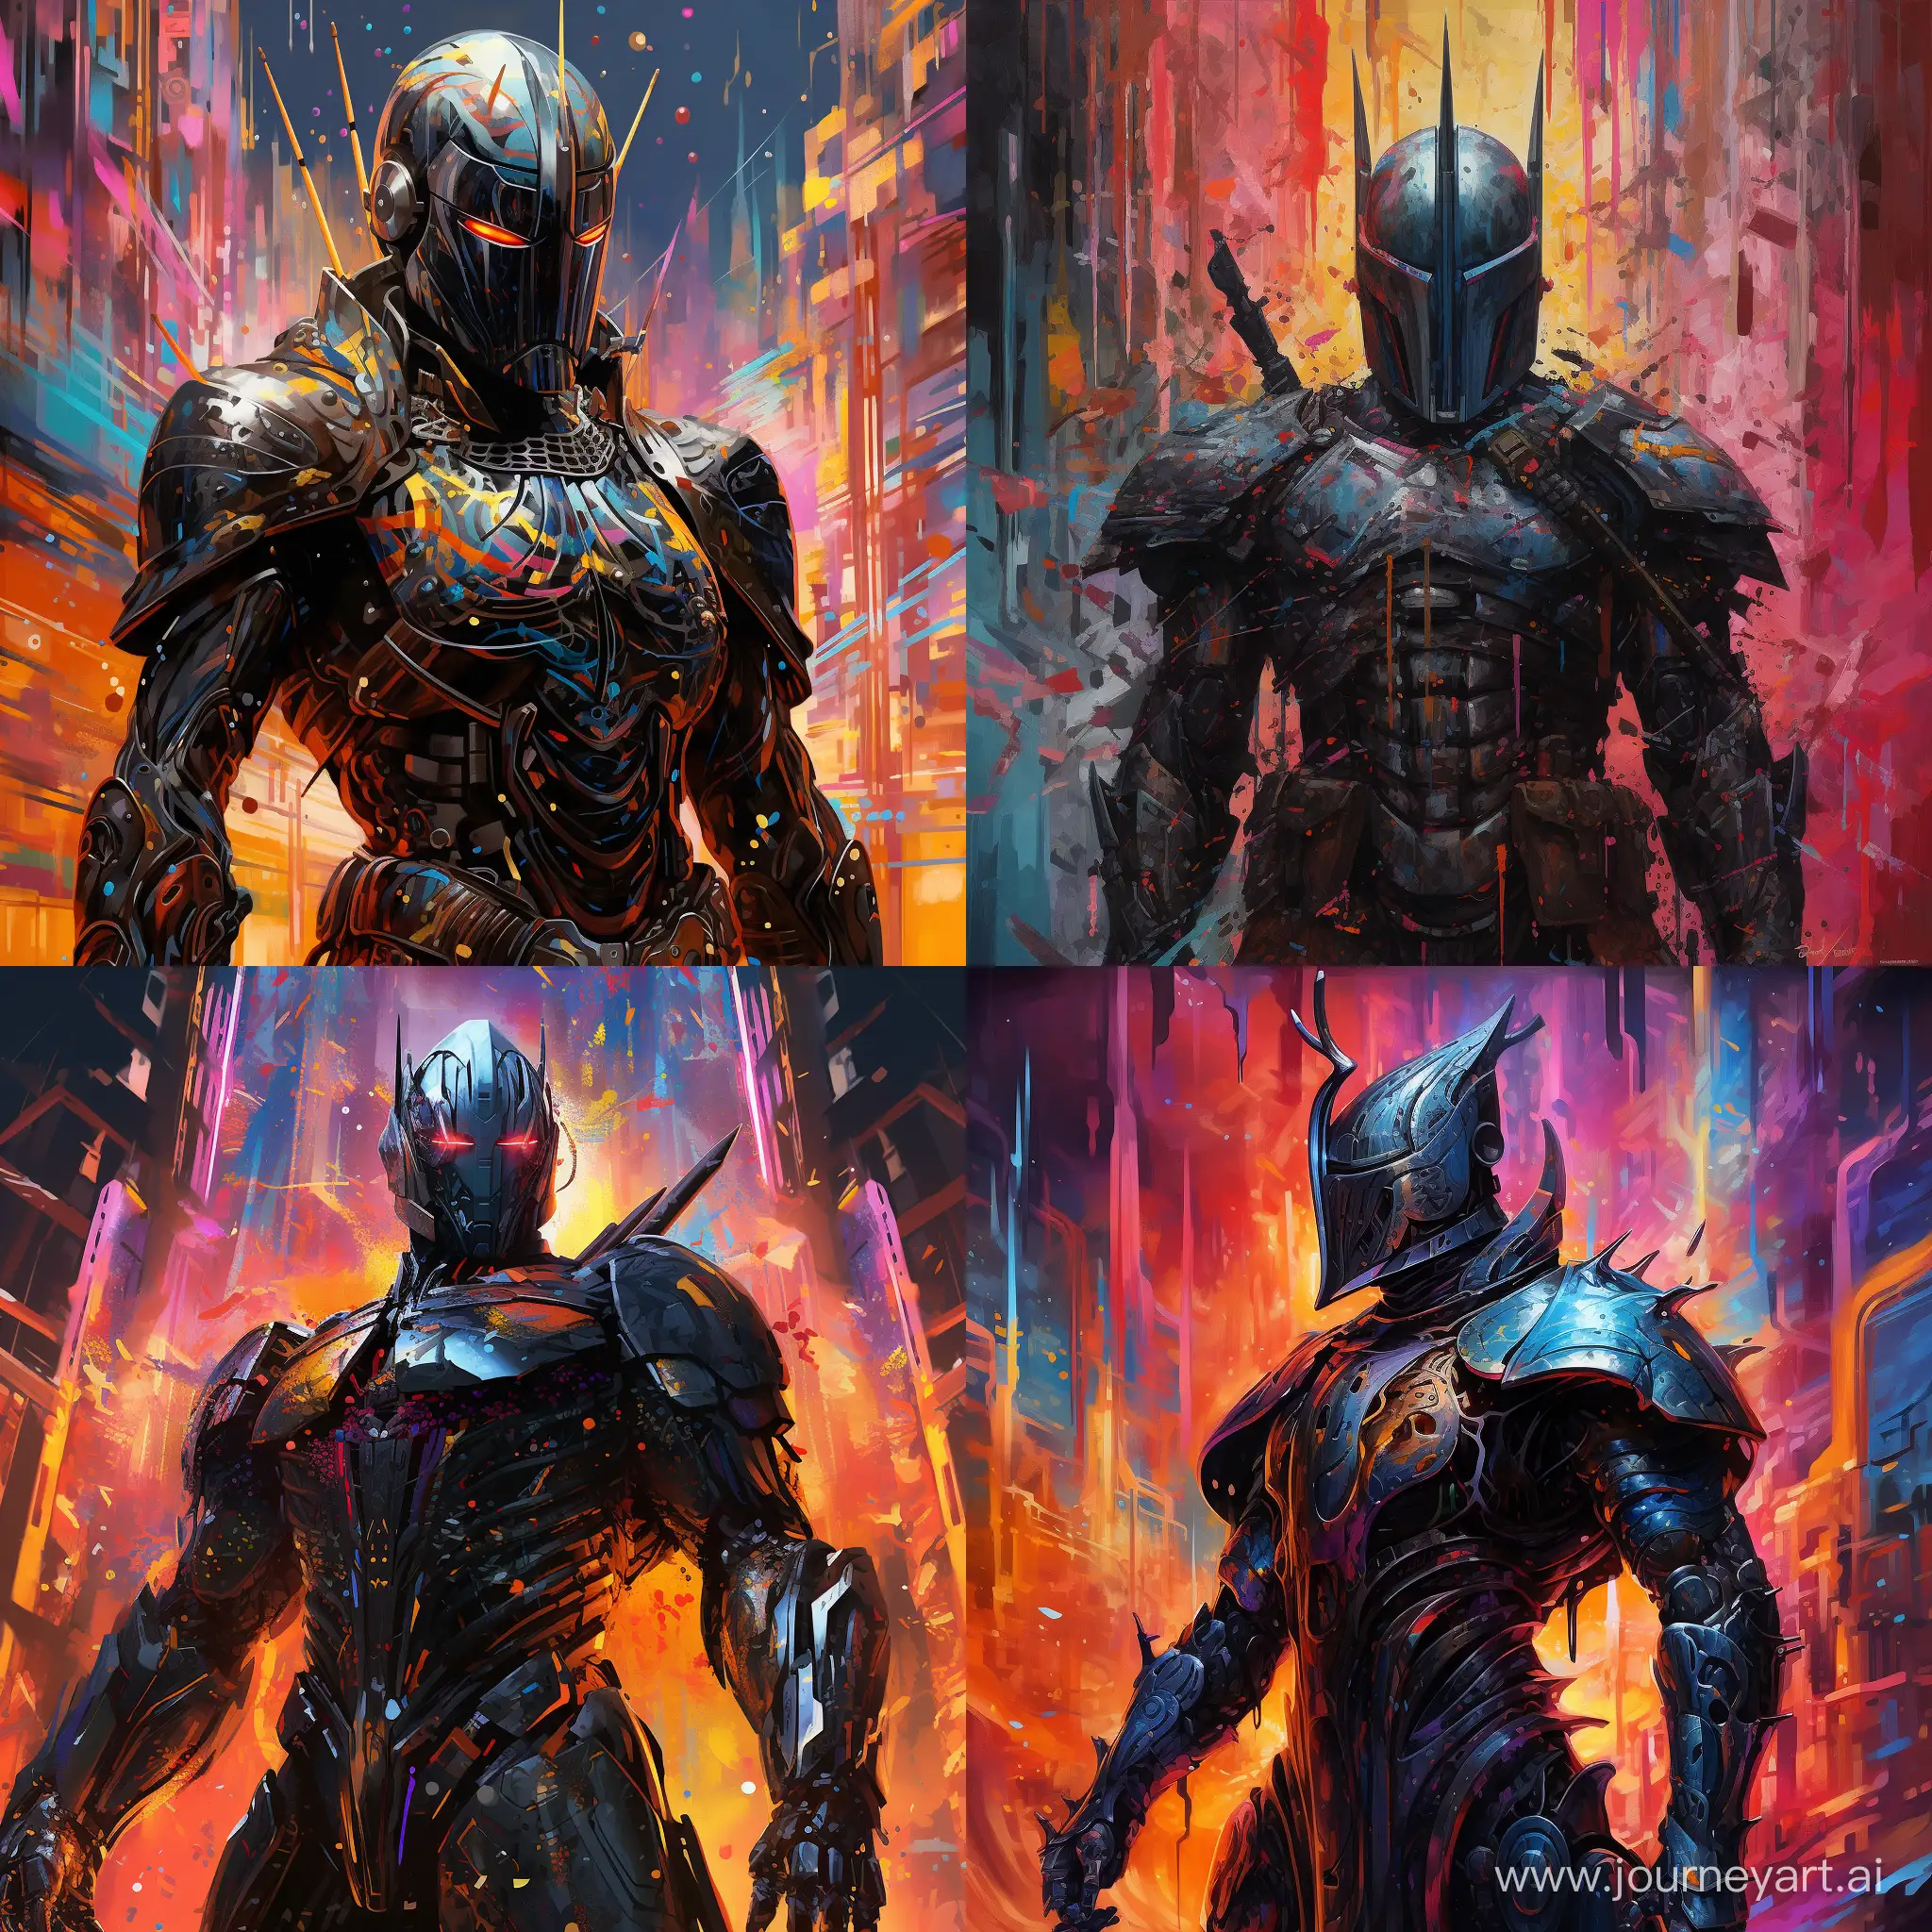 stands tall, The Black knight stands tall in interesting armor , in cyberpunk style, stands tall, explosion of color, abstraction, unusual